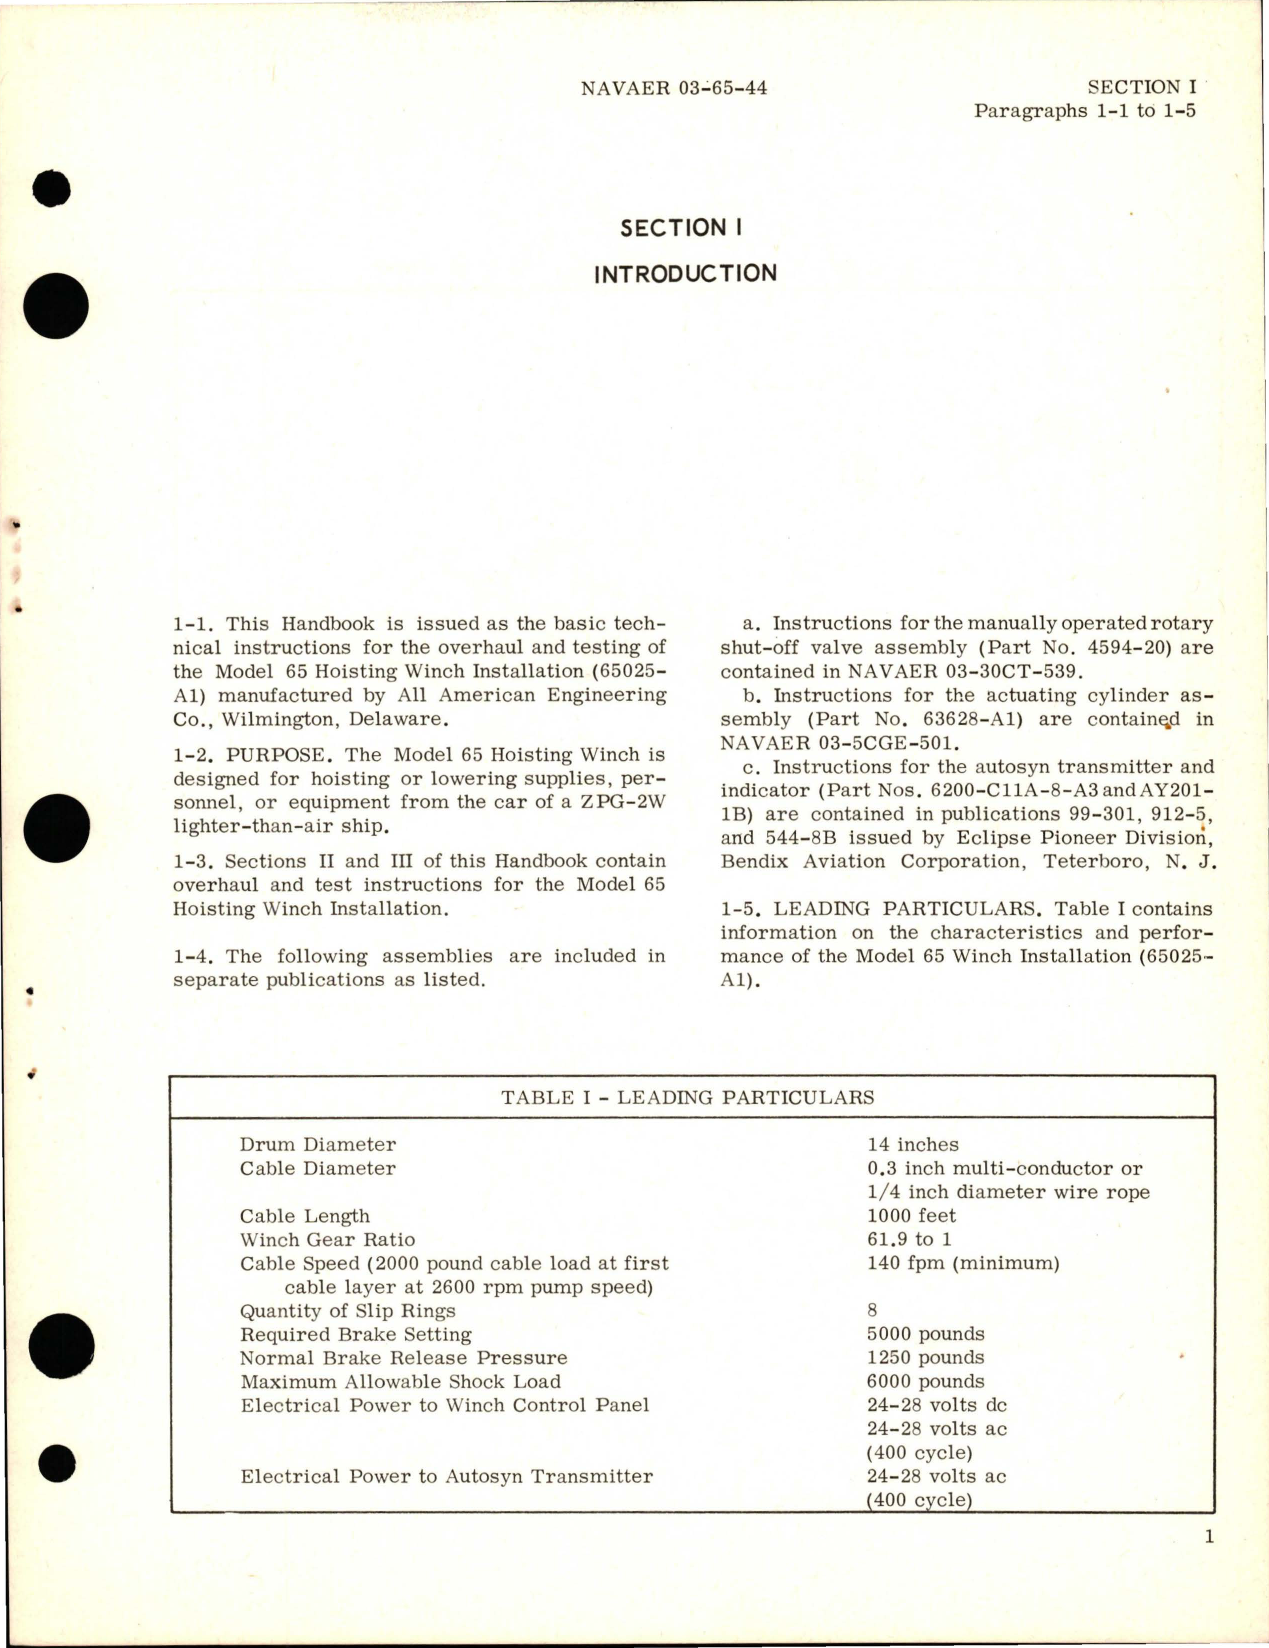 Sample page 5 from AirCorps Library document: Overhaul Instructions for Hoisting Winch - Model 65